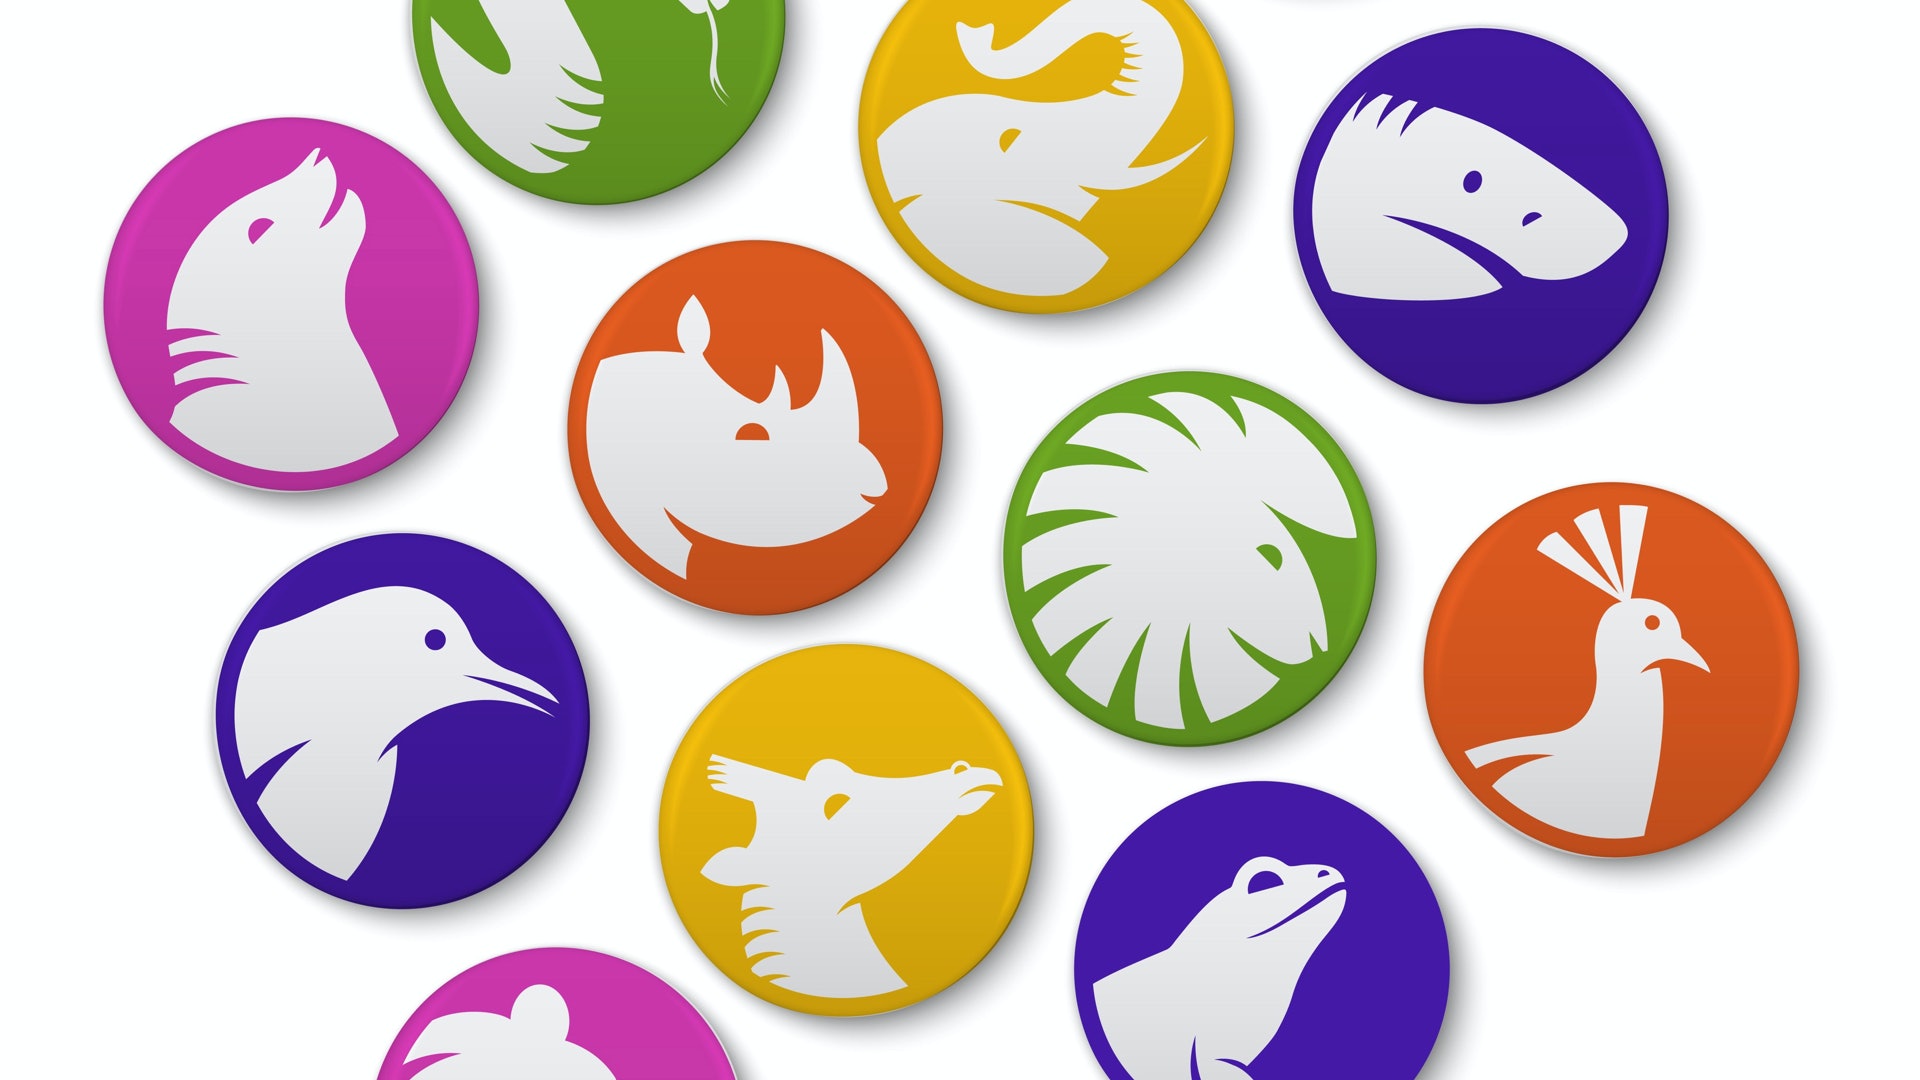 San Diego Zoo Branding – Buttons